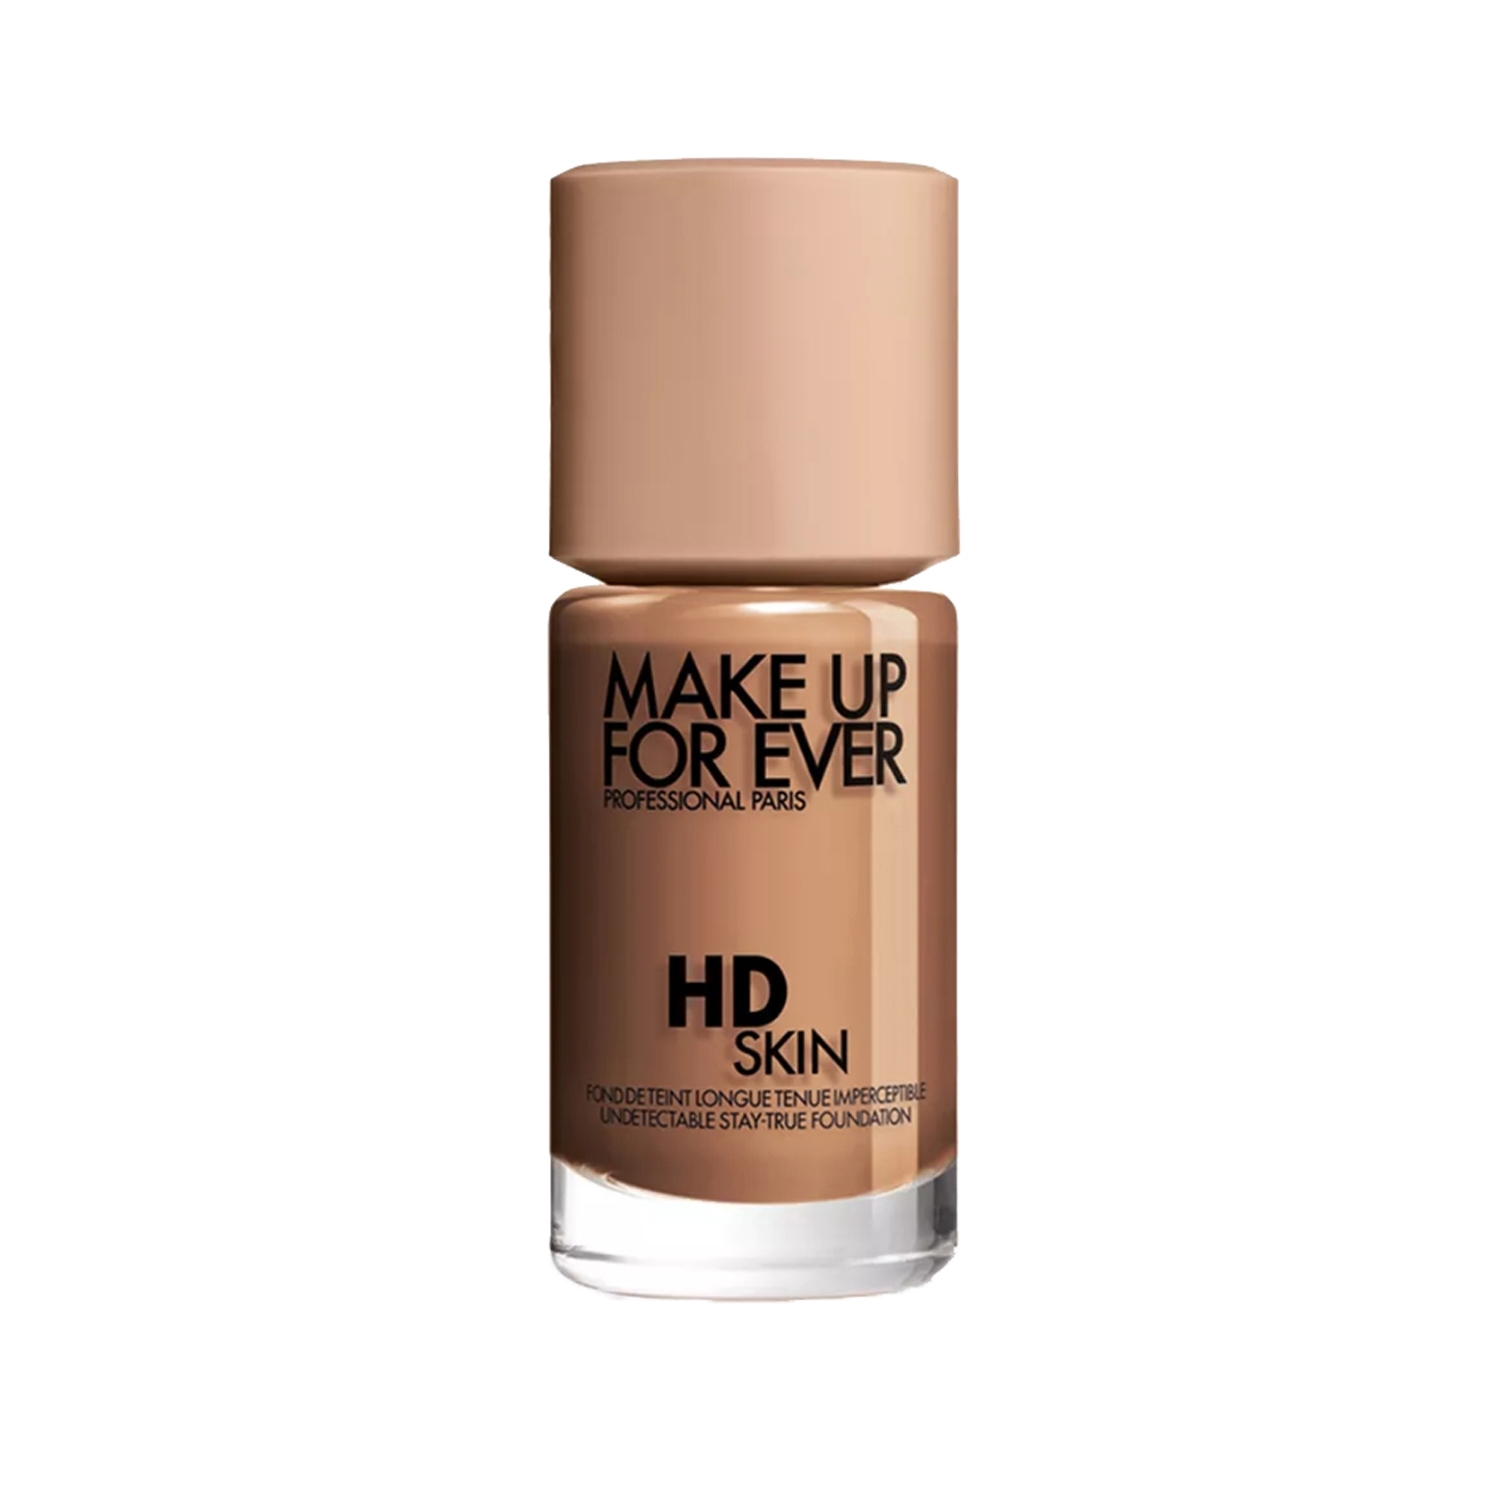 Make Up For Ever | Make Up For Ever HD Skin Undetectable Liquid Foundation - 3N54 Hazelnut (30ml)